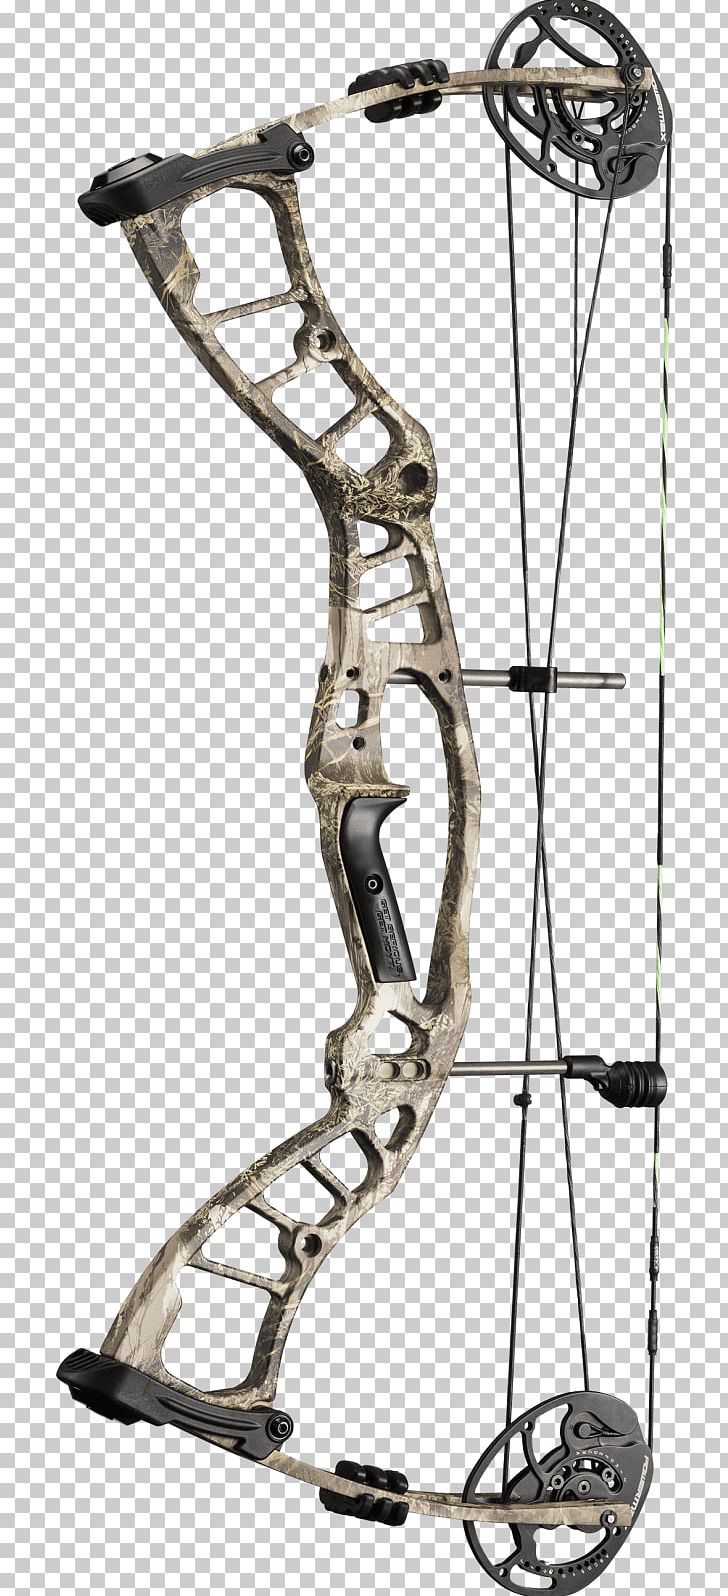 Compound Bows Bow And Arrow Archery Bowhunting PNG, Clipart, Advanced Archery, Archery, Bow, Bow And Arrow, Bowhunting Free PNG Download